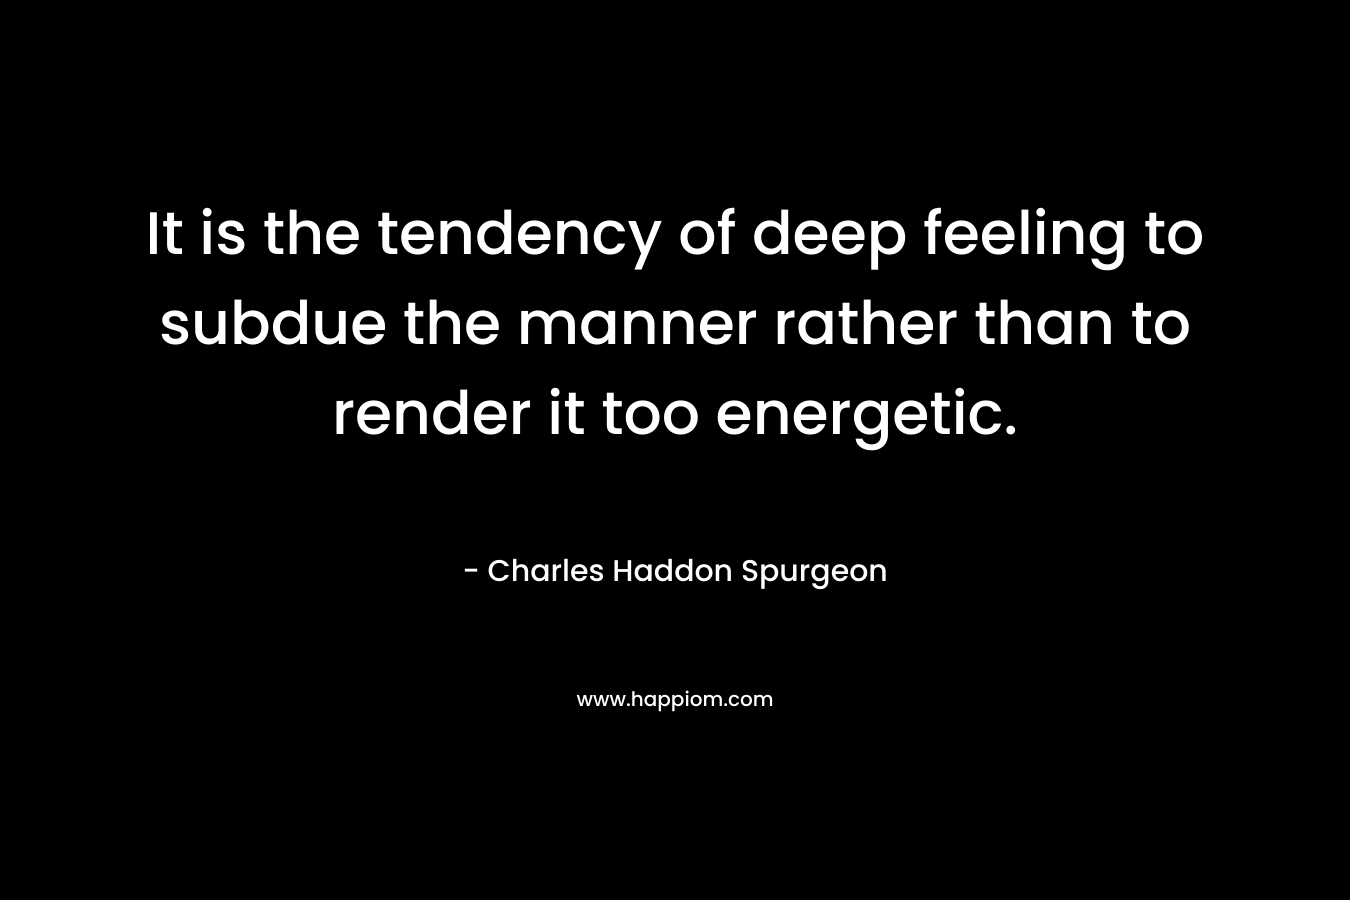 It is the tendency of deep feeling to subdue the manner rather than to render it too energetic. – Charles Haddon Spurgeon